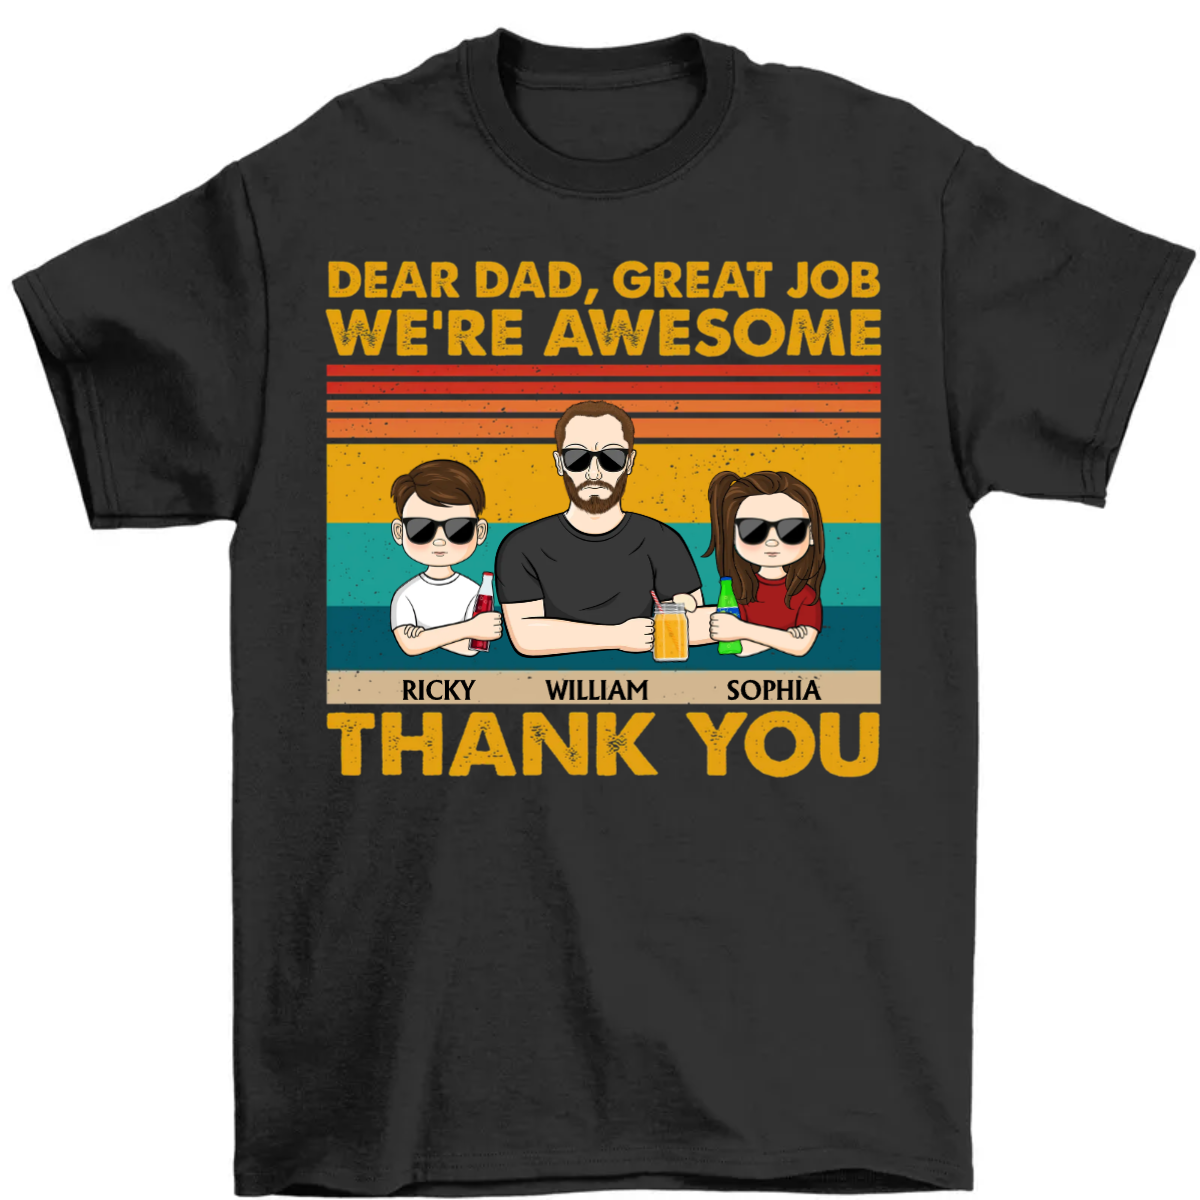 Dear Dad Great Job We're Awesome Thank You - Funny, Birthday Gift For Father, Husband - Personalized Custom T-Shirt